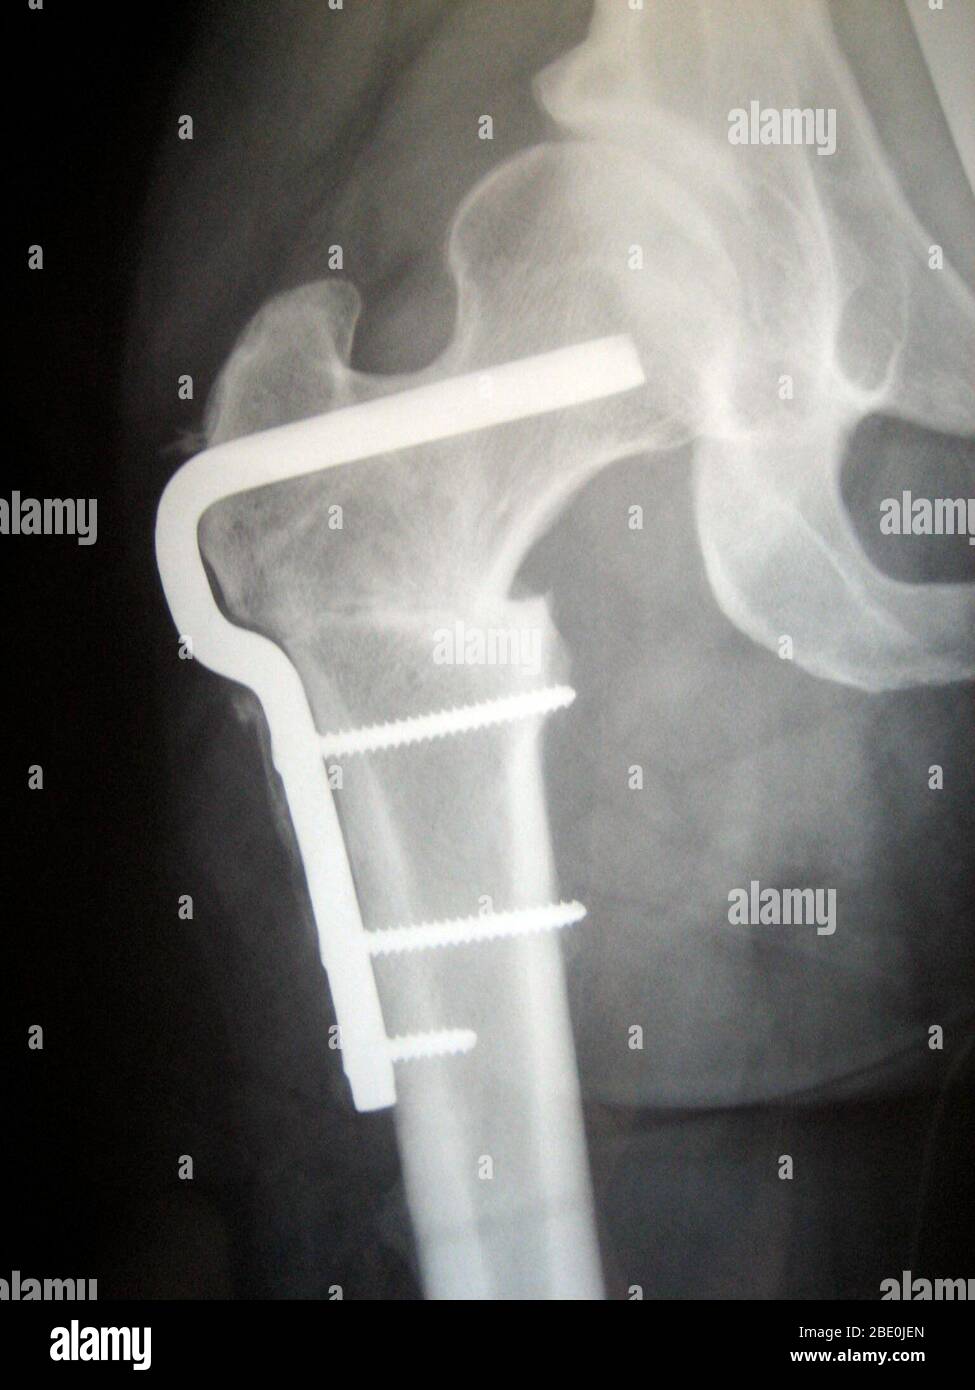 Femoral Osteotomy Hardware To Correct Femoral Rotation Caused High